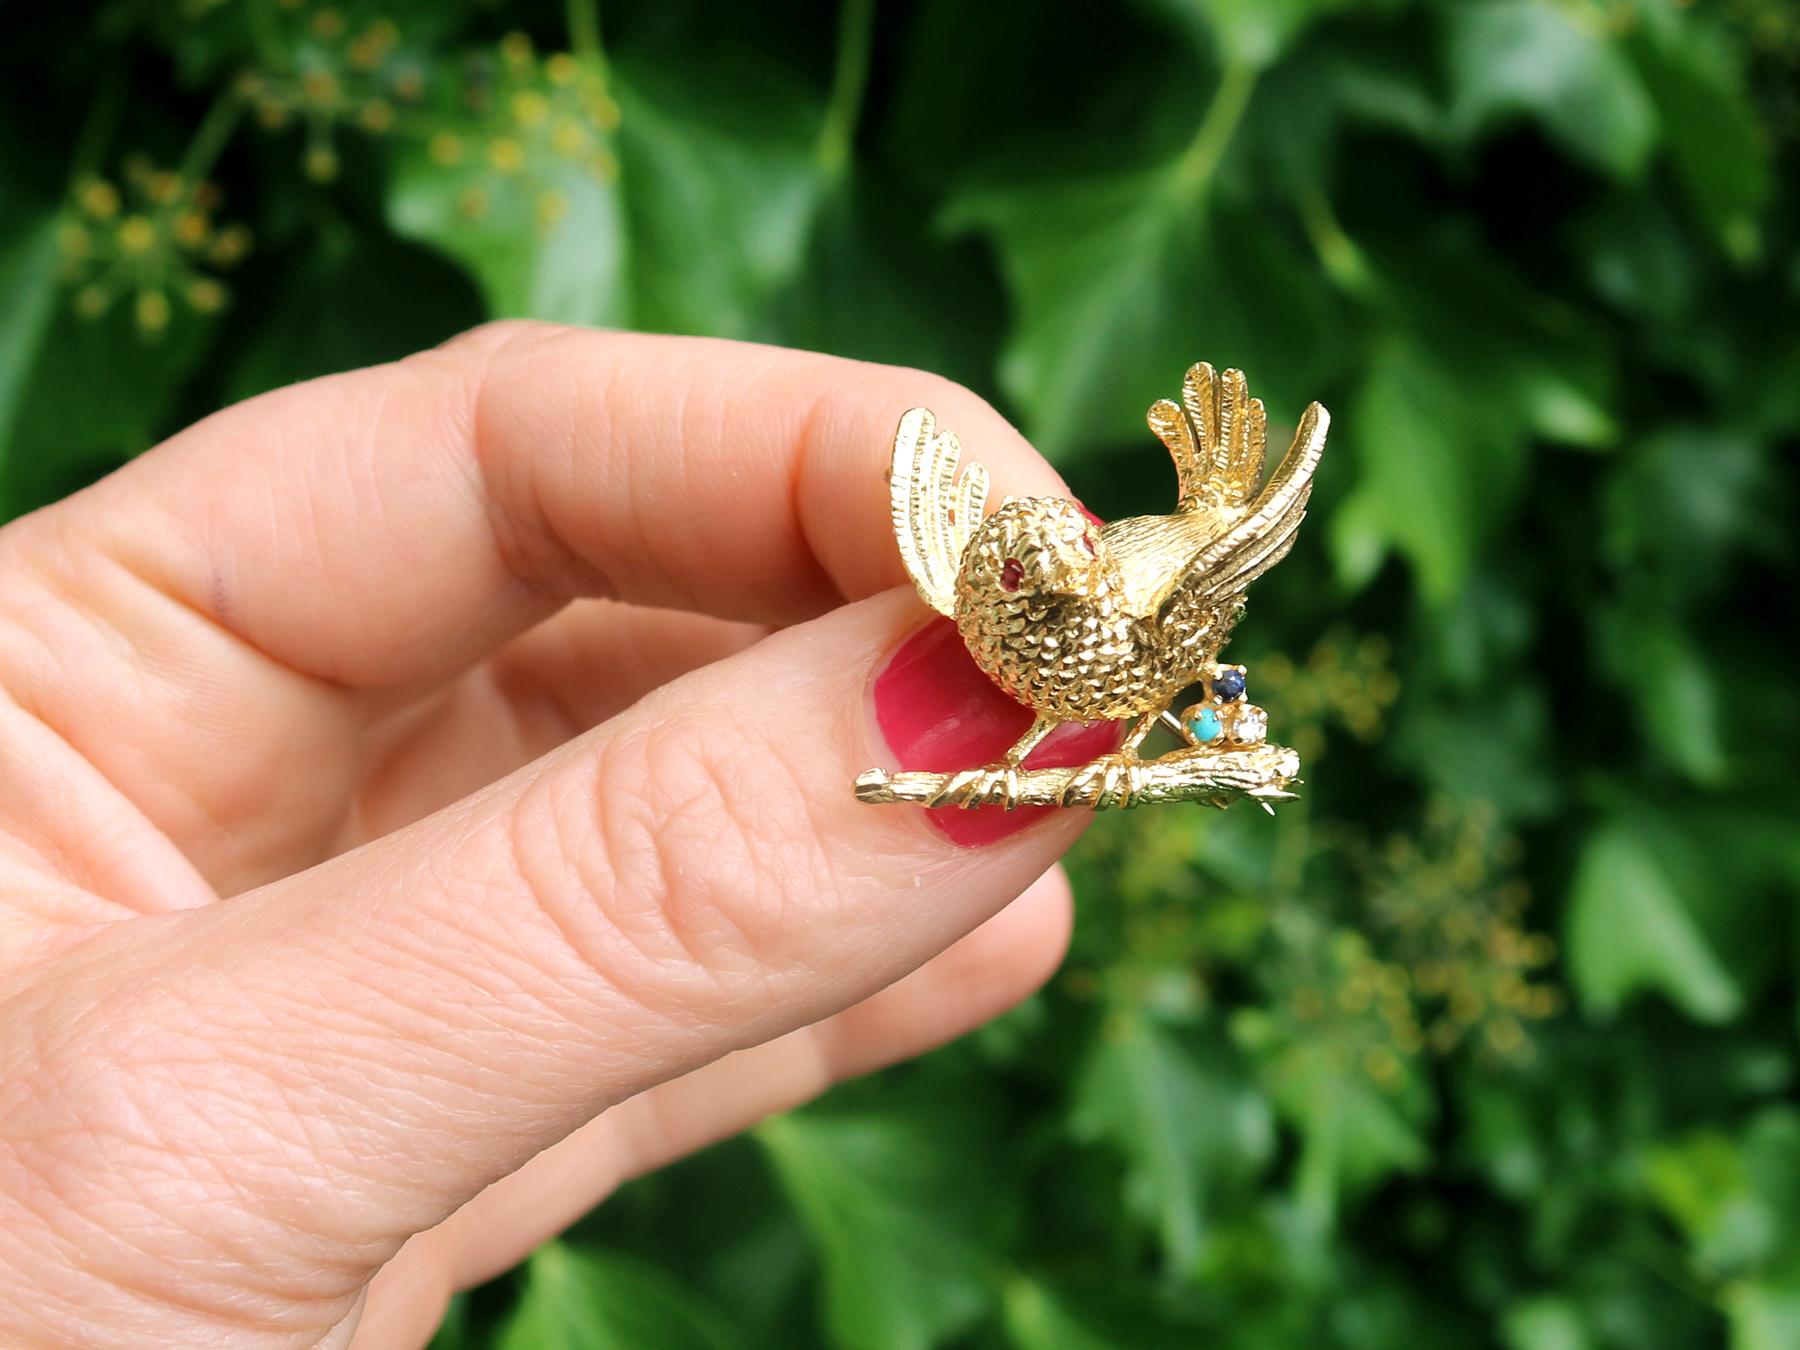 A fine and impressive vintage English 0.04 carat ruby, 0.02 carat sapphire, 0.02 carat turquoise and 0.02 carat diamond, 18 karat yellow gold bird brooch; part of our diverse vintage jewelry collections.

This fine and impressive multi-gem vintage